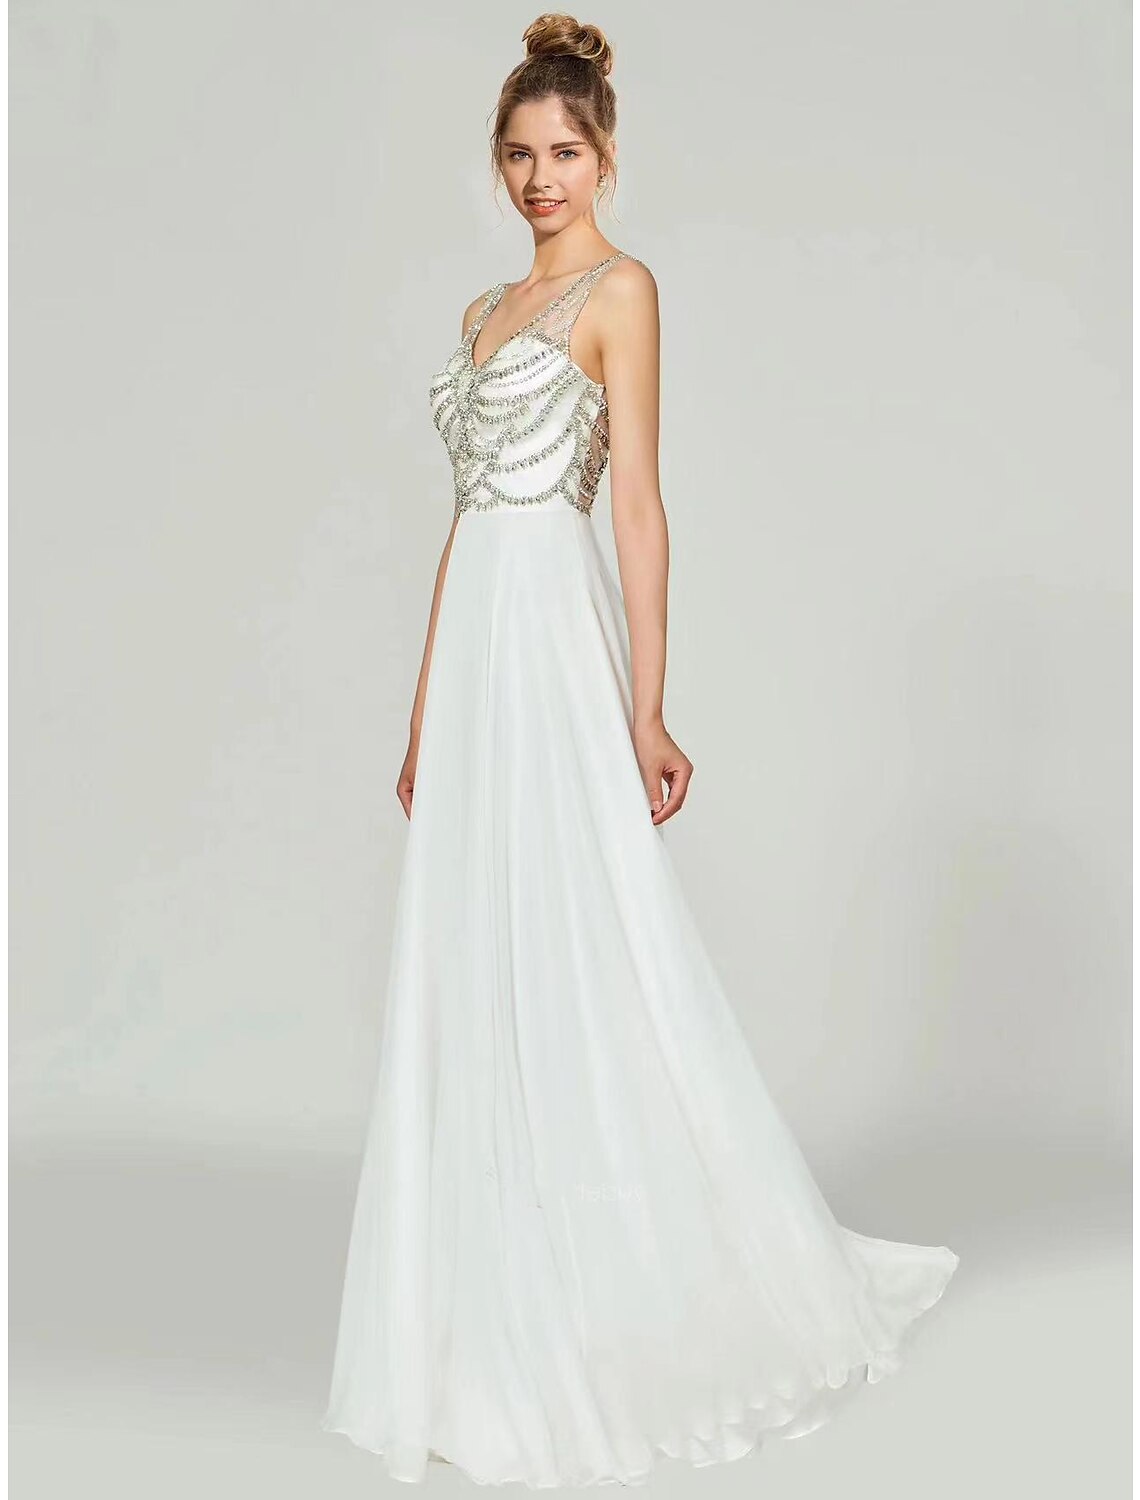 Evening Gown Beautiful Back Dress Wedding Guest Floor Length Sleeveless High Neck Chiffon with Appliques